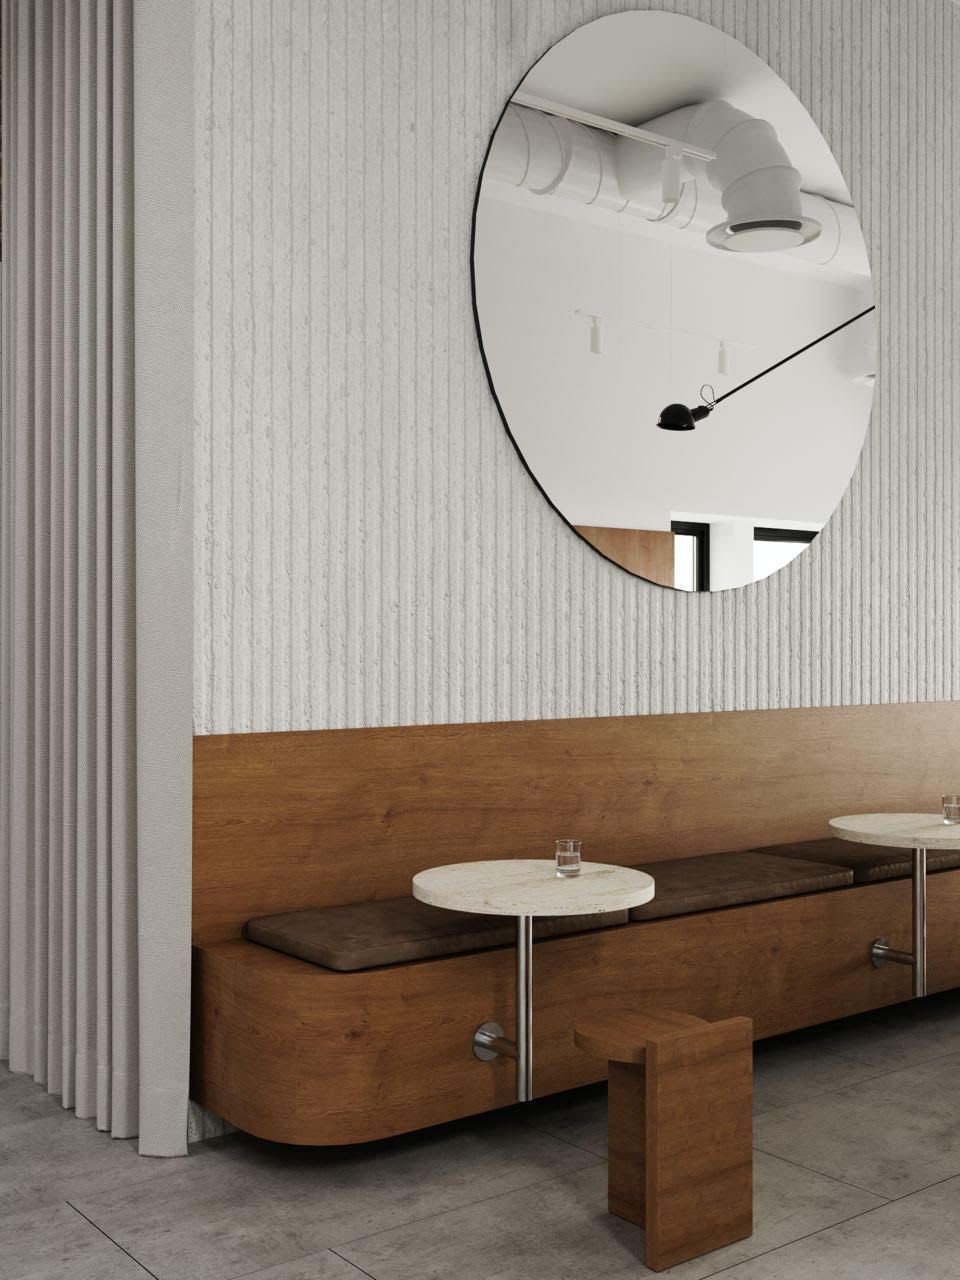 A rendering of a wooden banquette inside a minimalistic cafe space.